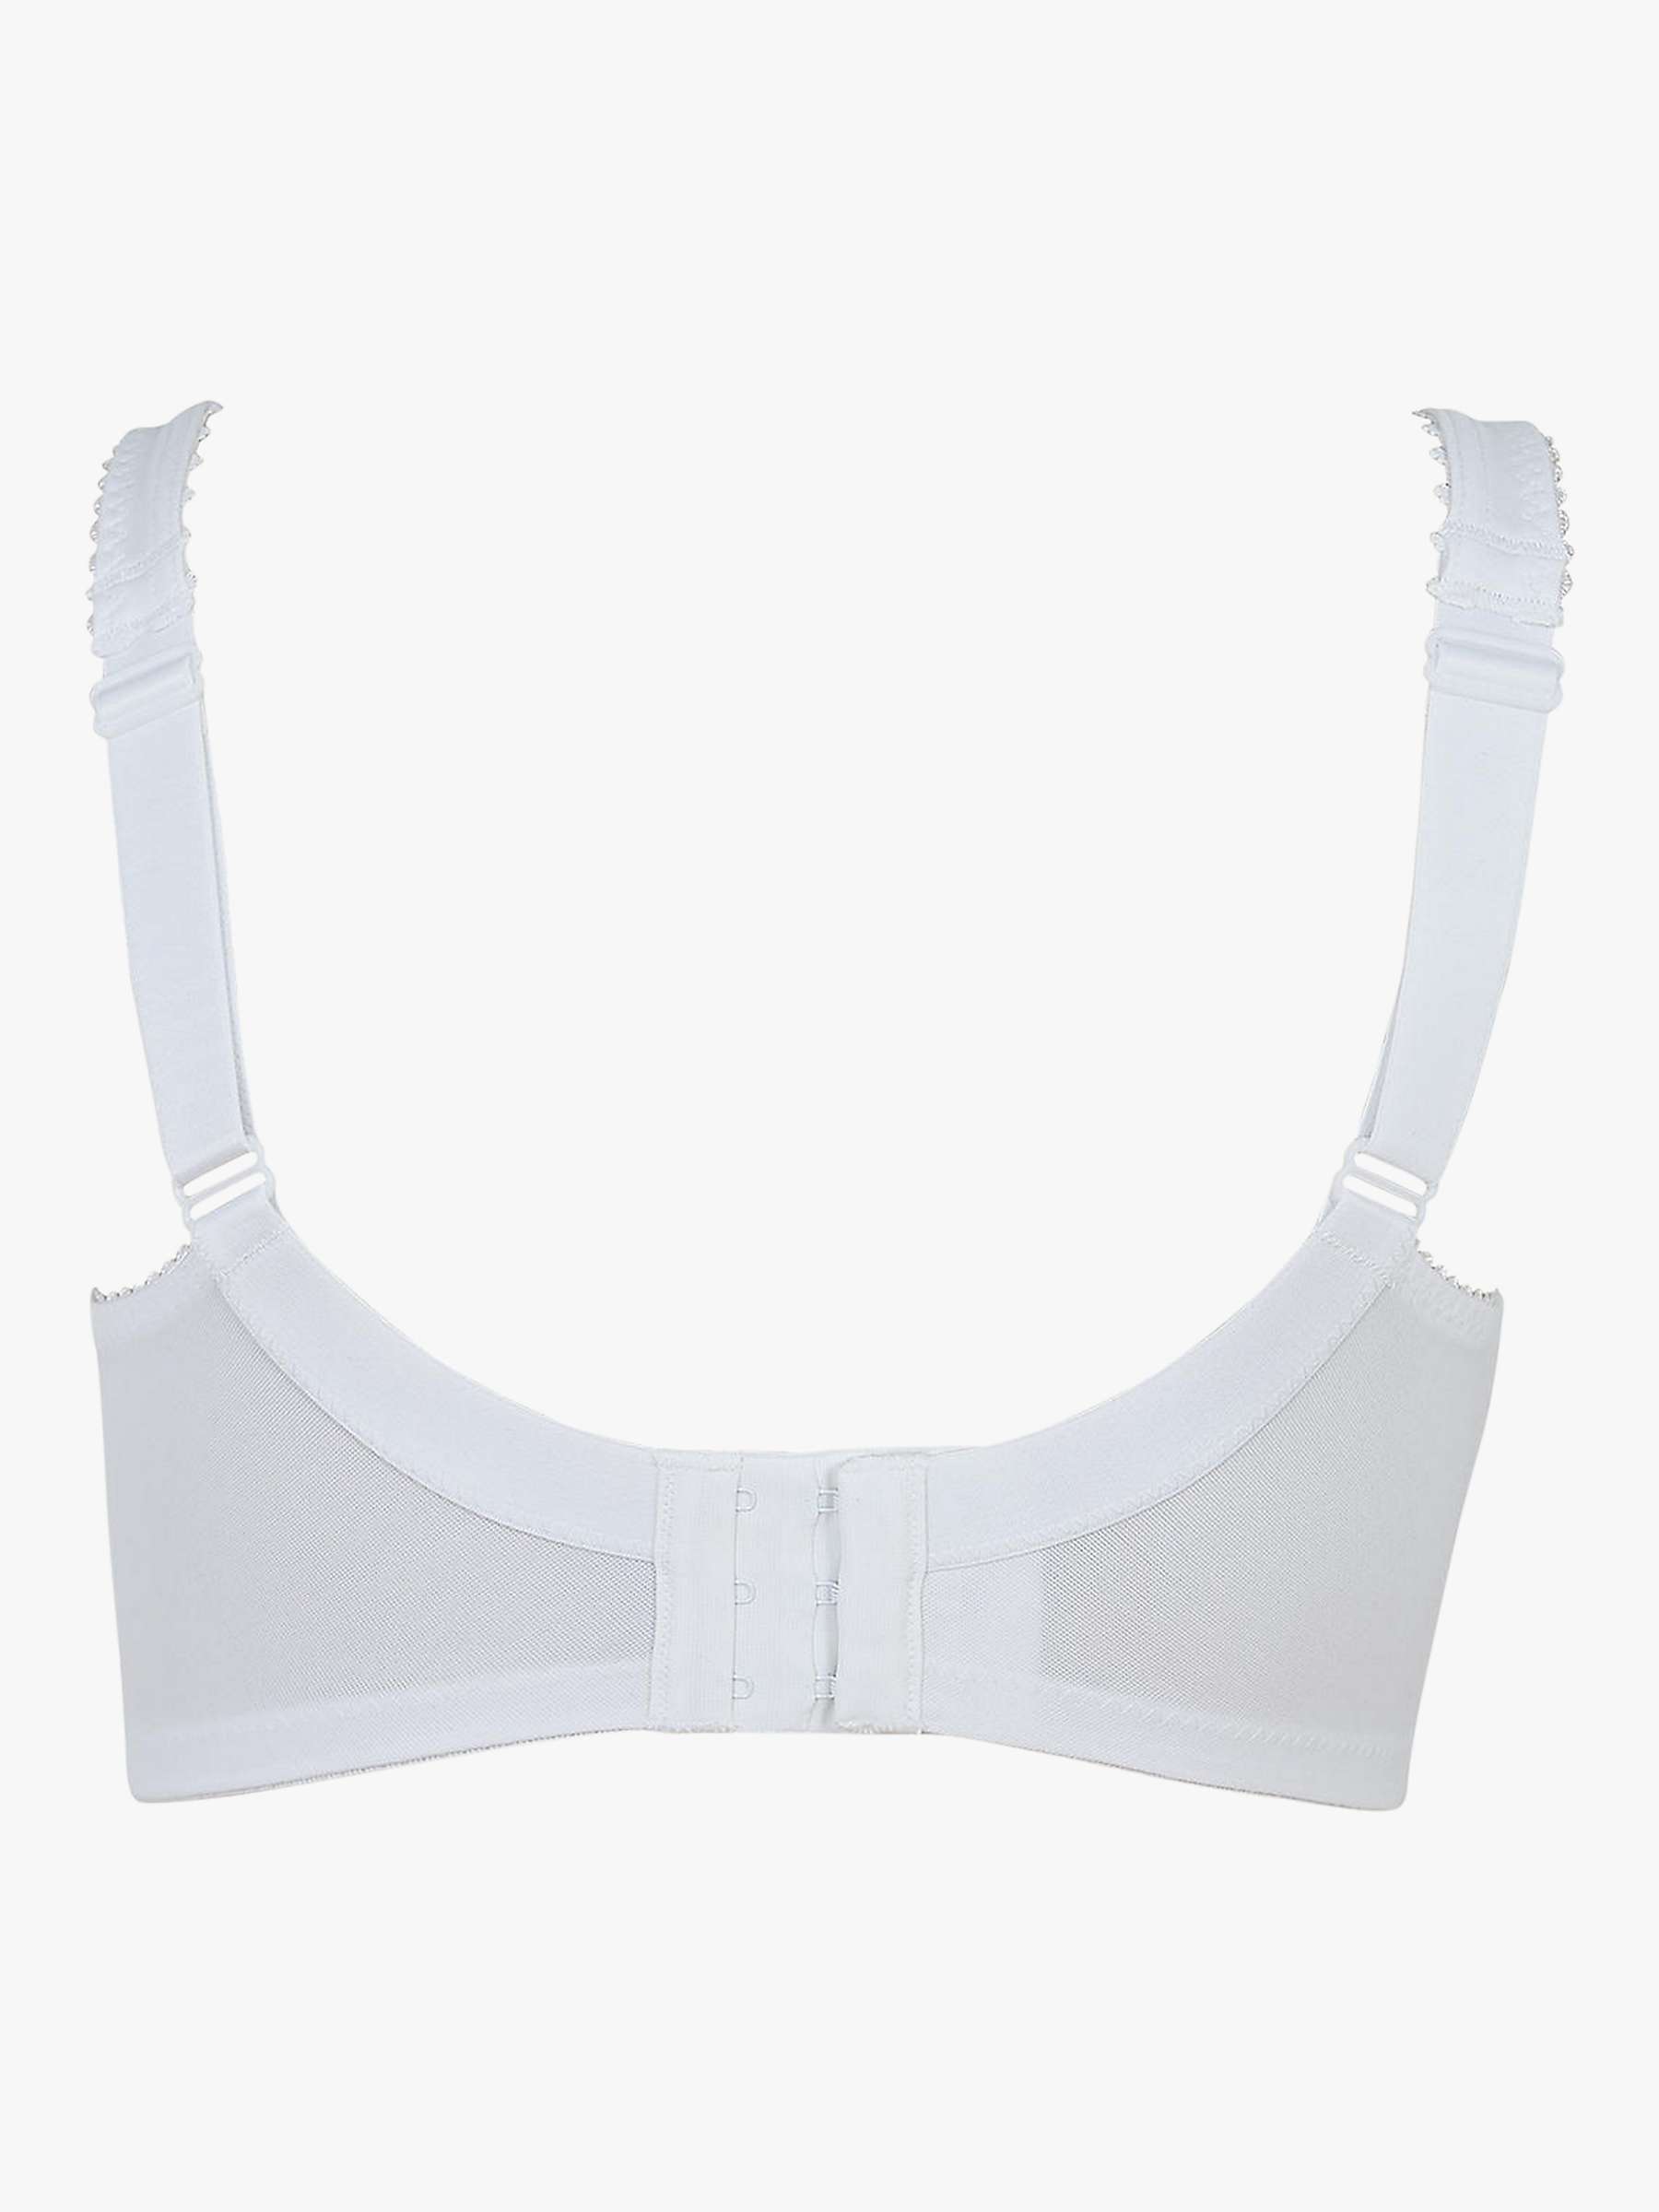 Buy Royce Grace 513 Cotton Rich Non-Wired Bra Online at johnlewis.com